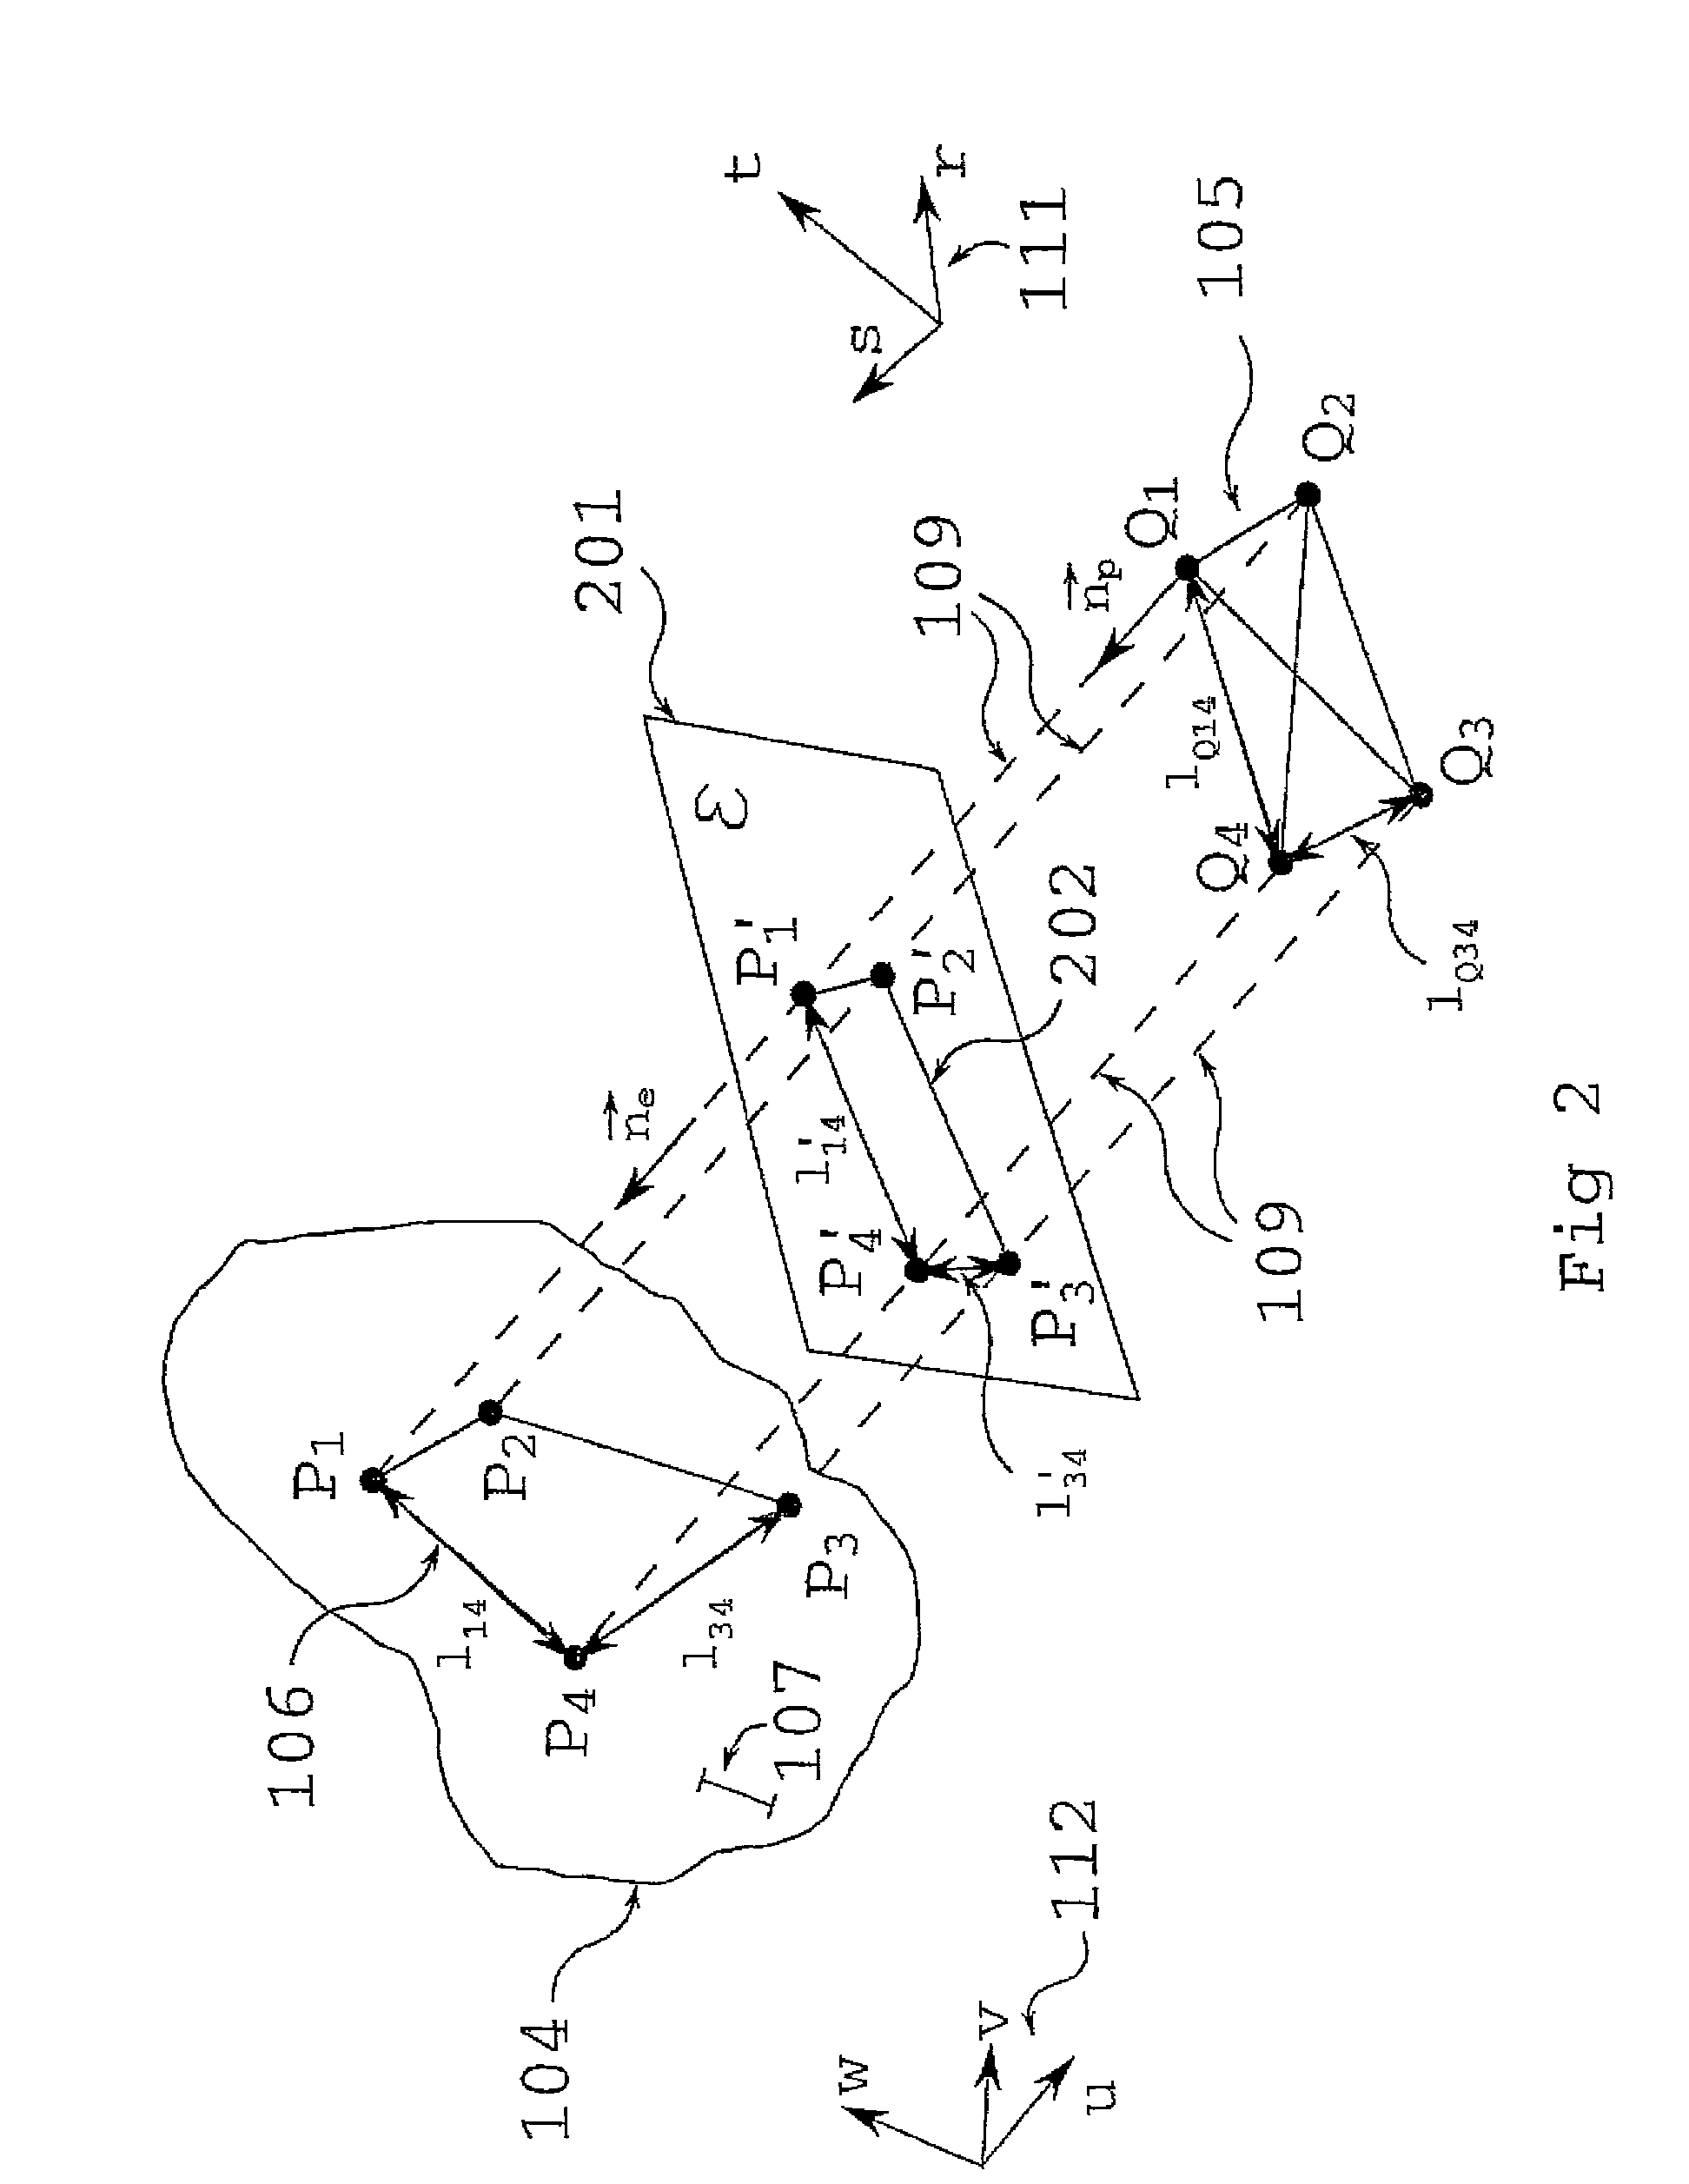 Mobile projection system for scaling and orientation of surfaces surveyed by an optical measuring system